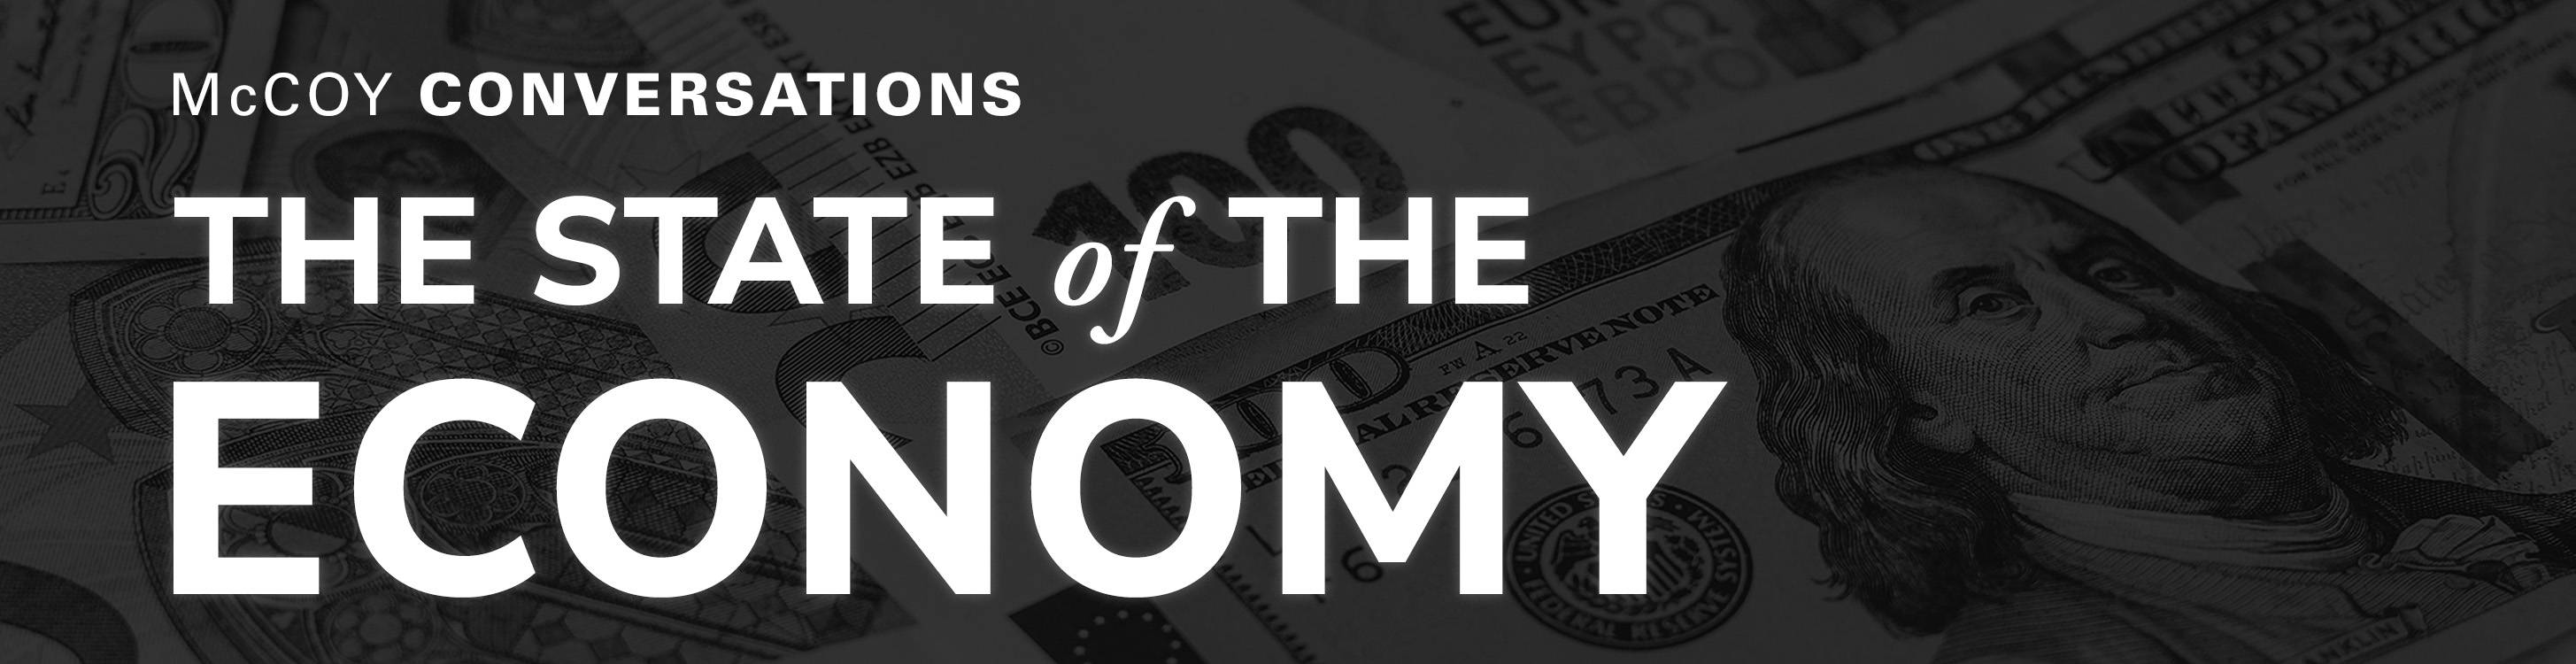 Black and white image of cash with text reading "McCoy Conversations, The State of the Economy"